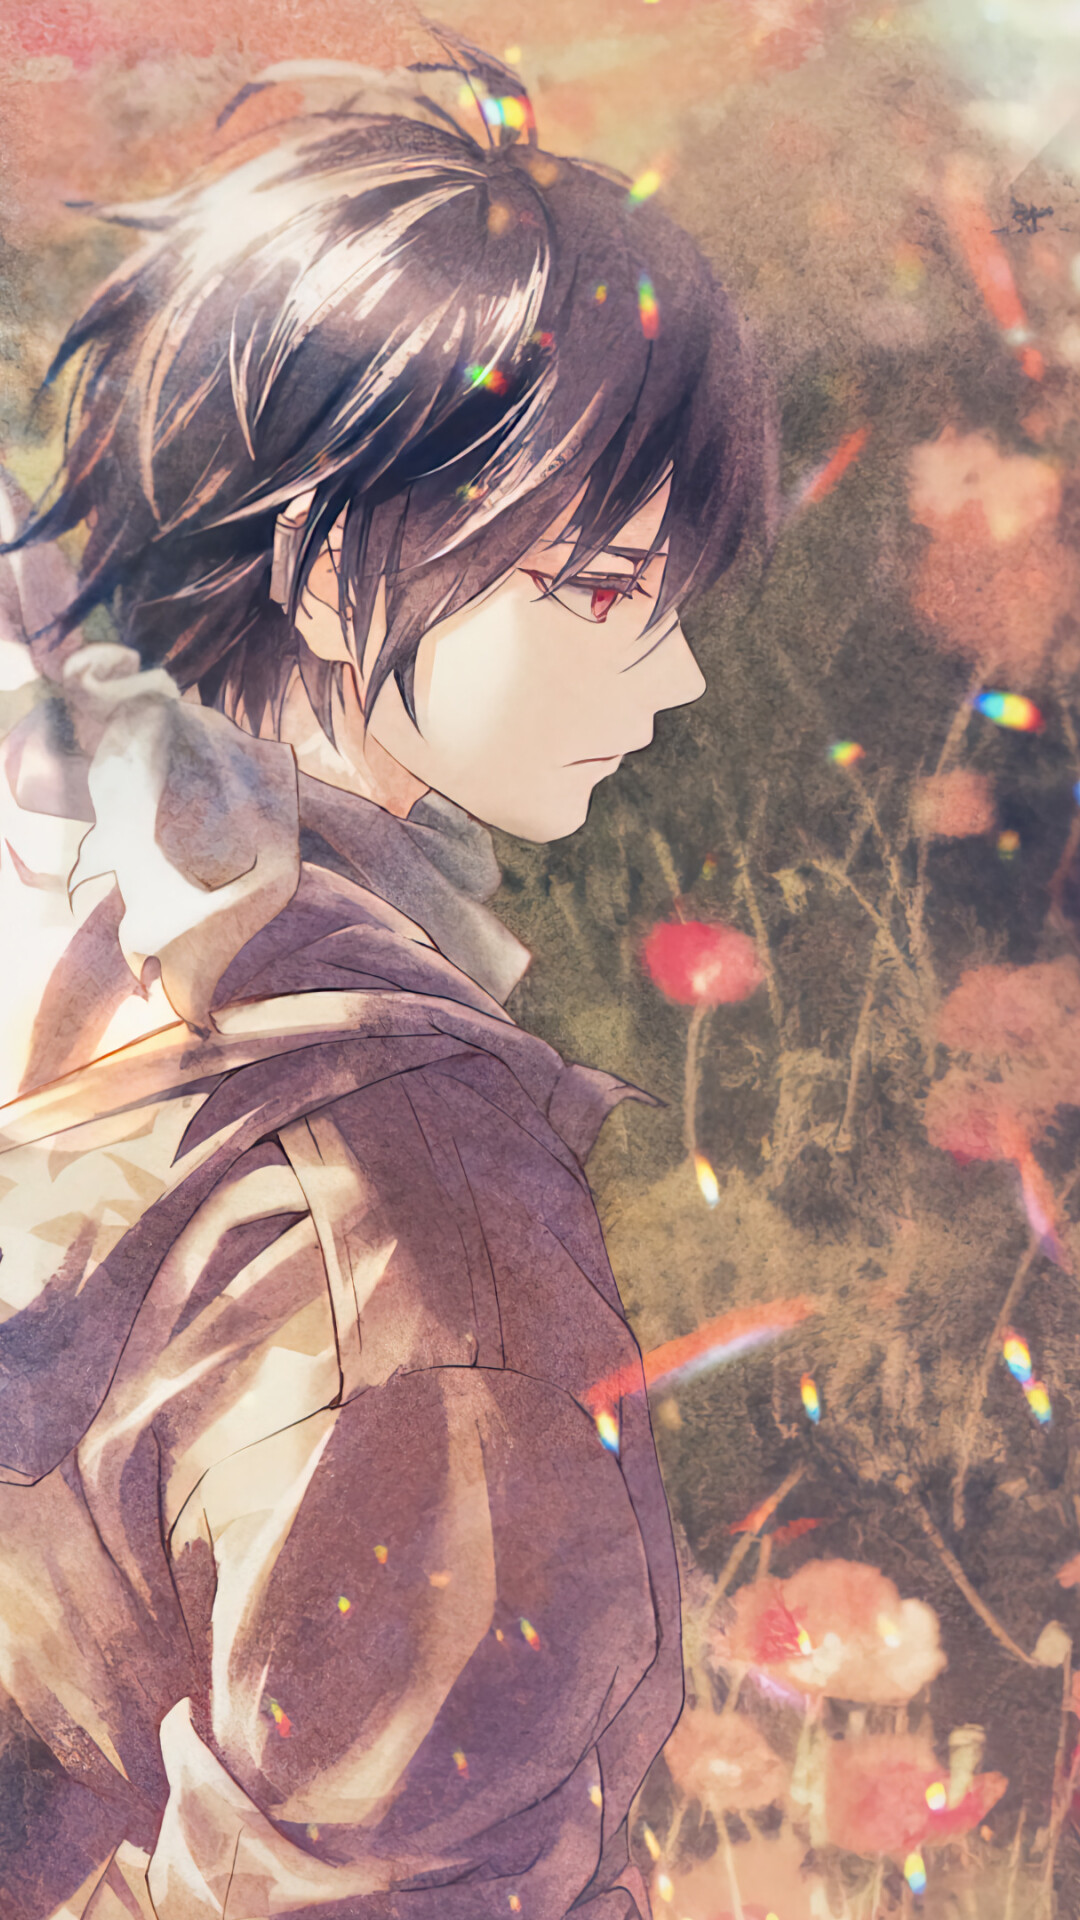 86 (TV Series): The third ending theme is "Alchemilla" by Regal Lily, Shinei Nouzen. 1080x1920 Full HD Background.